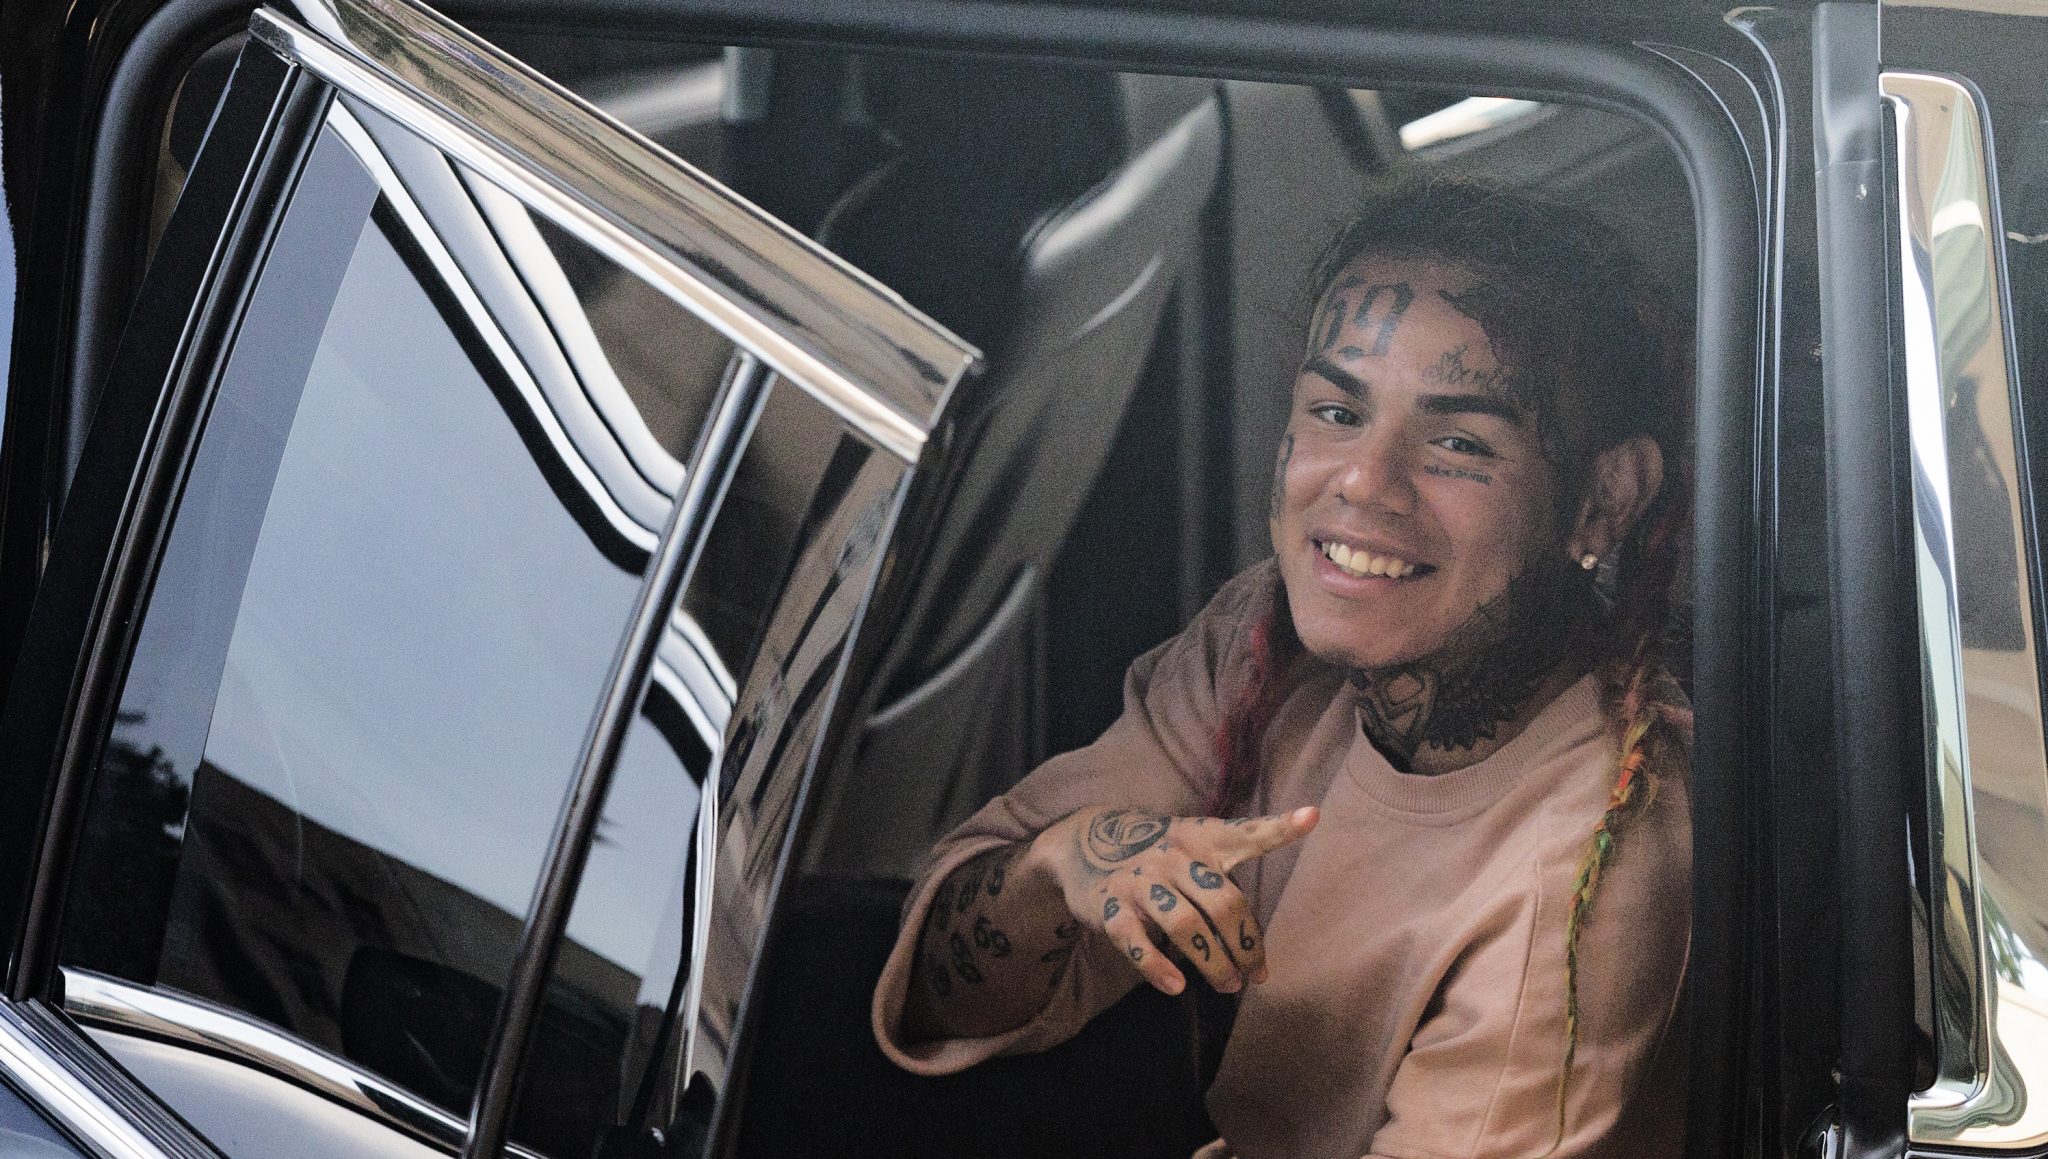 Tekashi Snitch Fears For His Life In Prison Wants Out